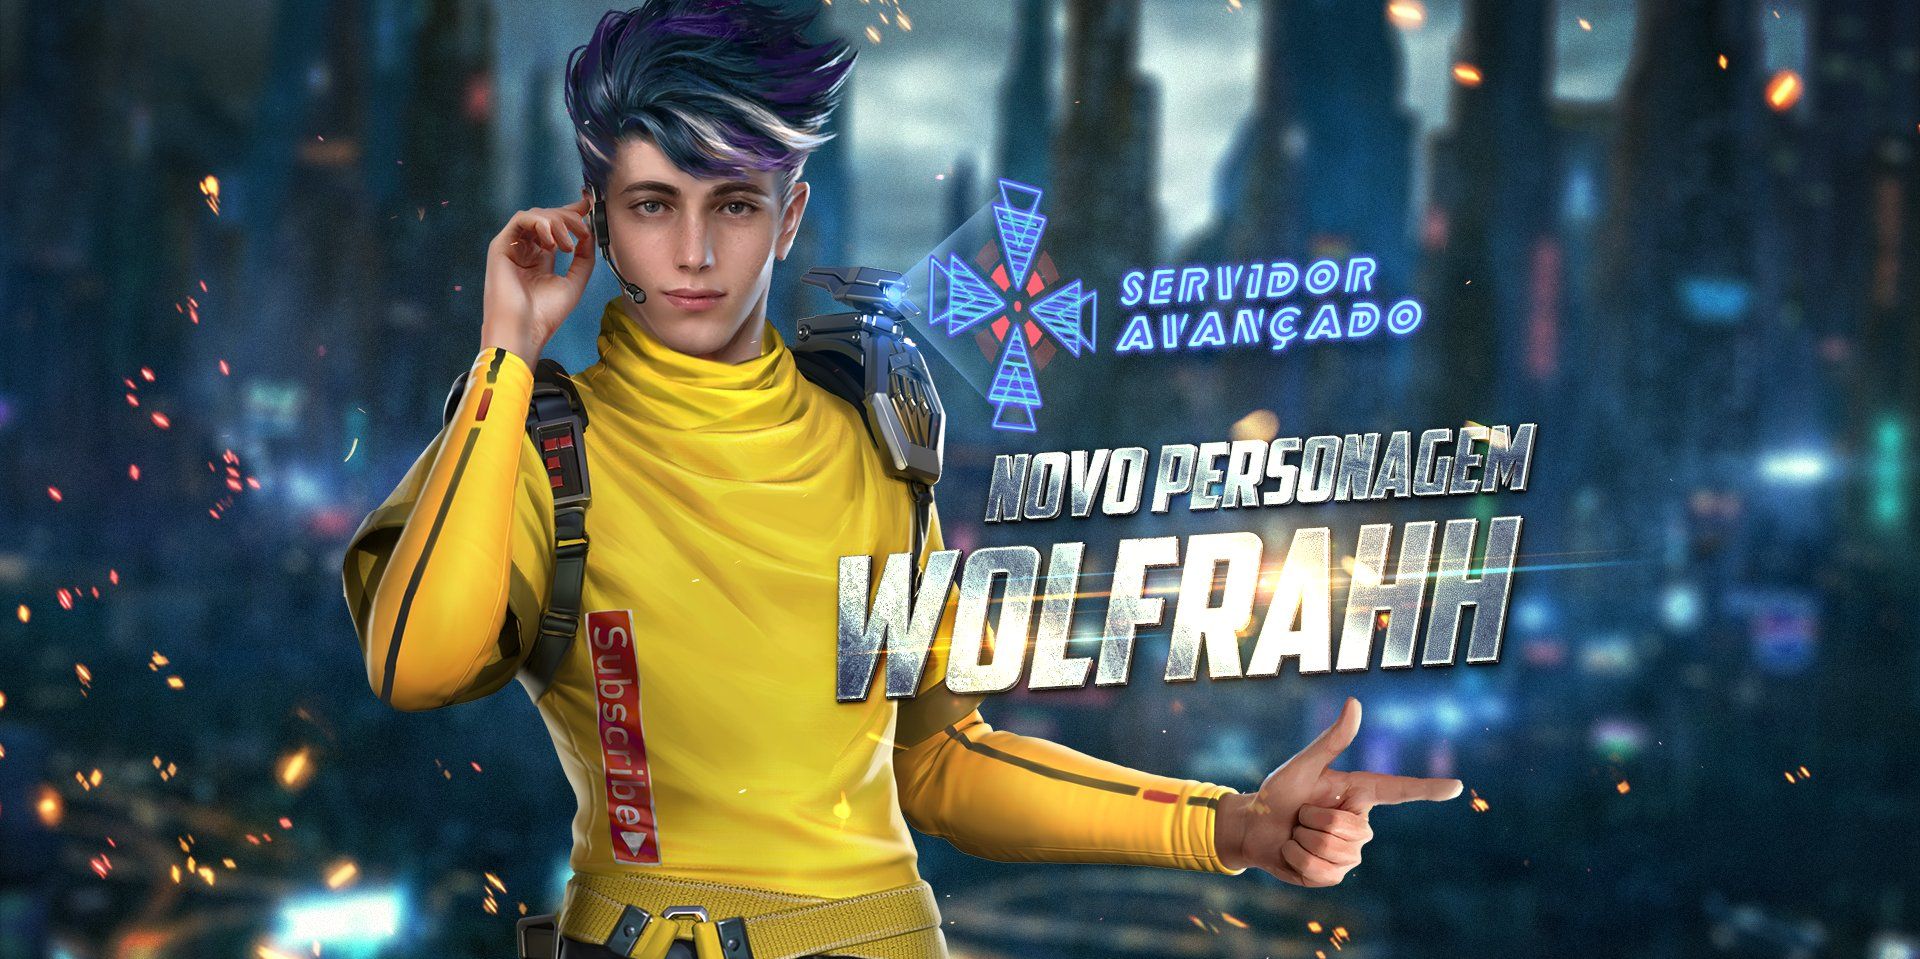 Garena Free Fire announces latest character, Wolfrahh